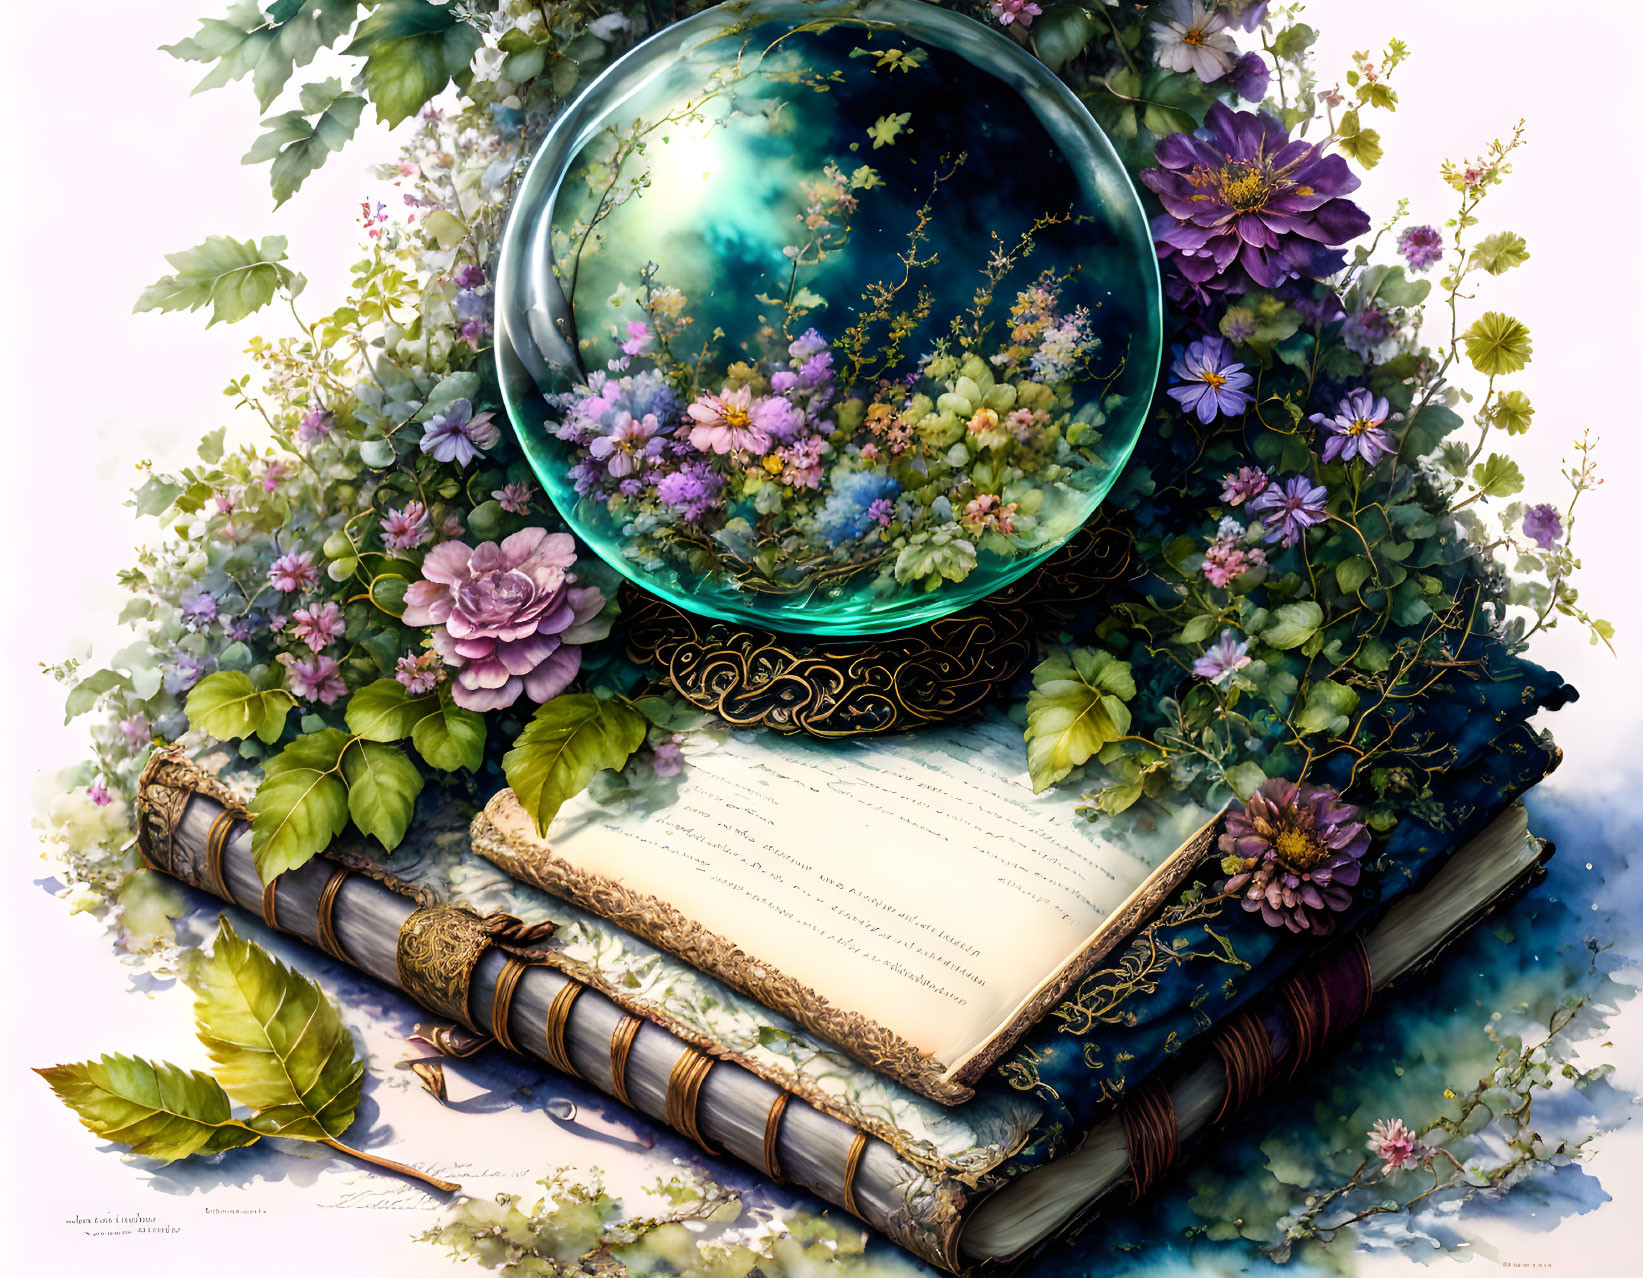 Colorful crystal ball on antique book with flowers and leaves